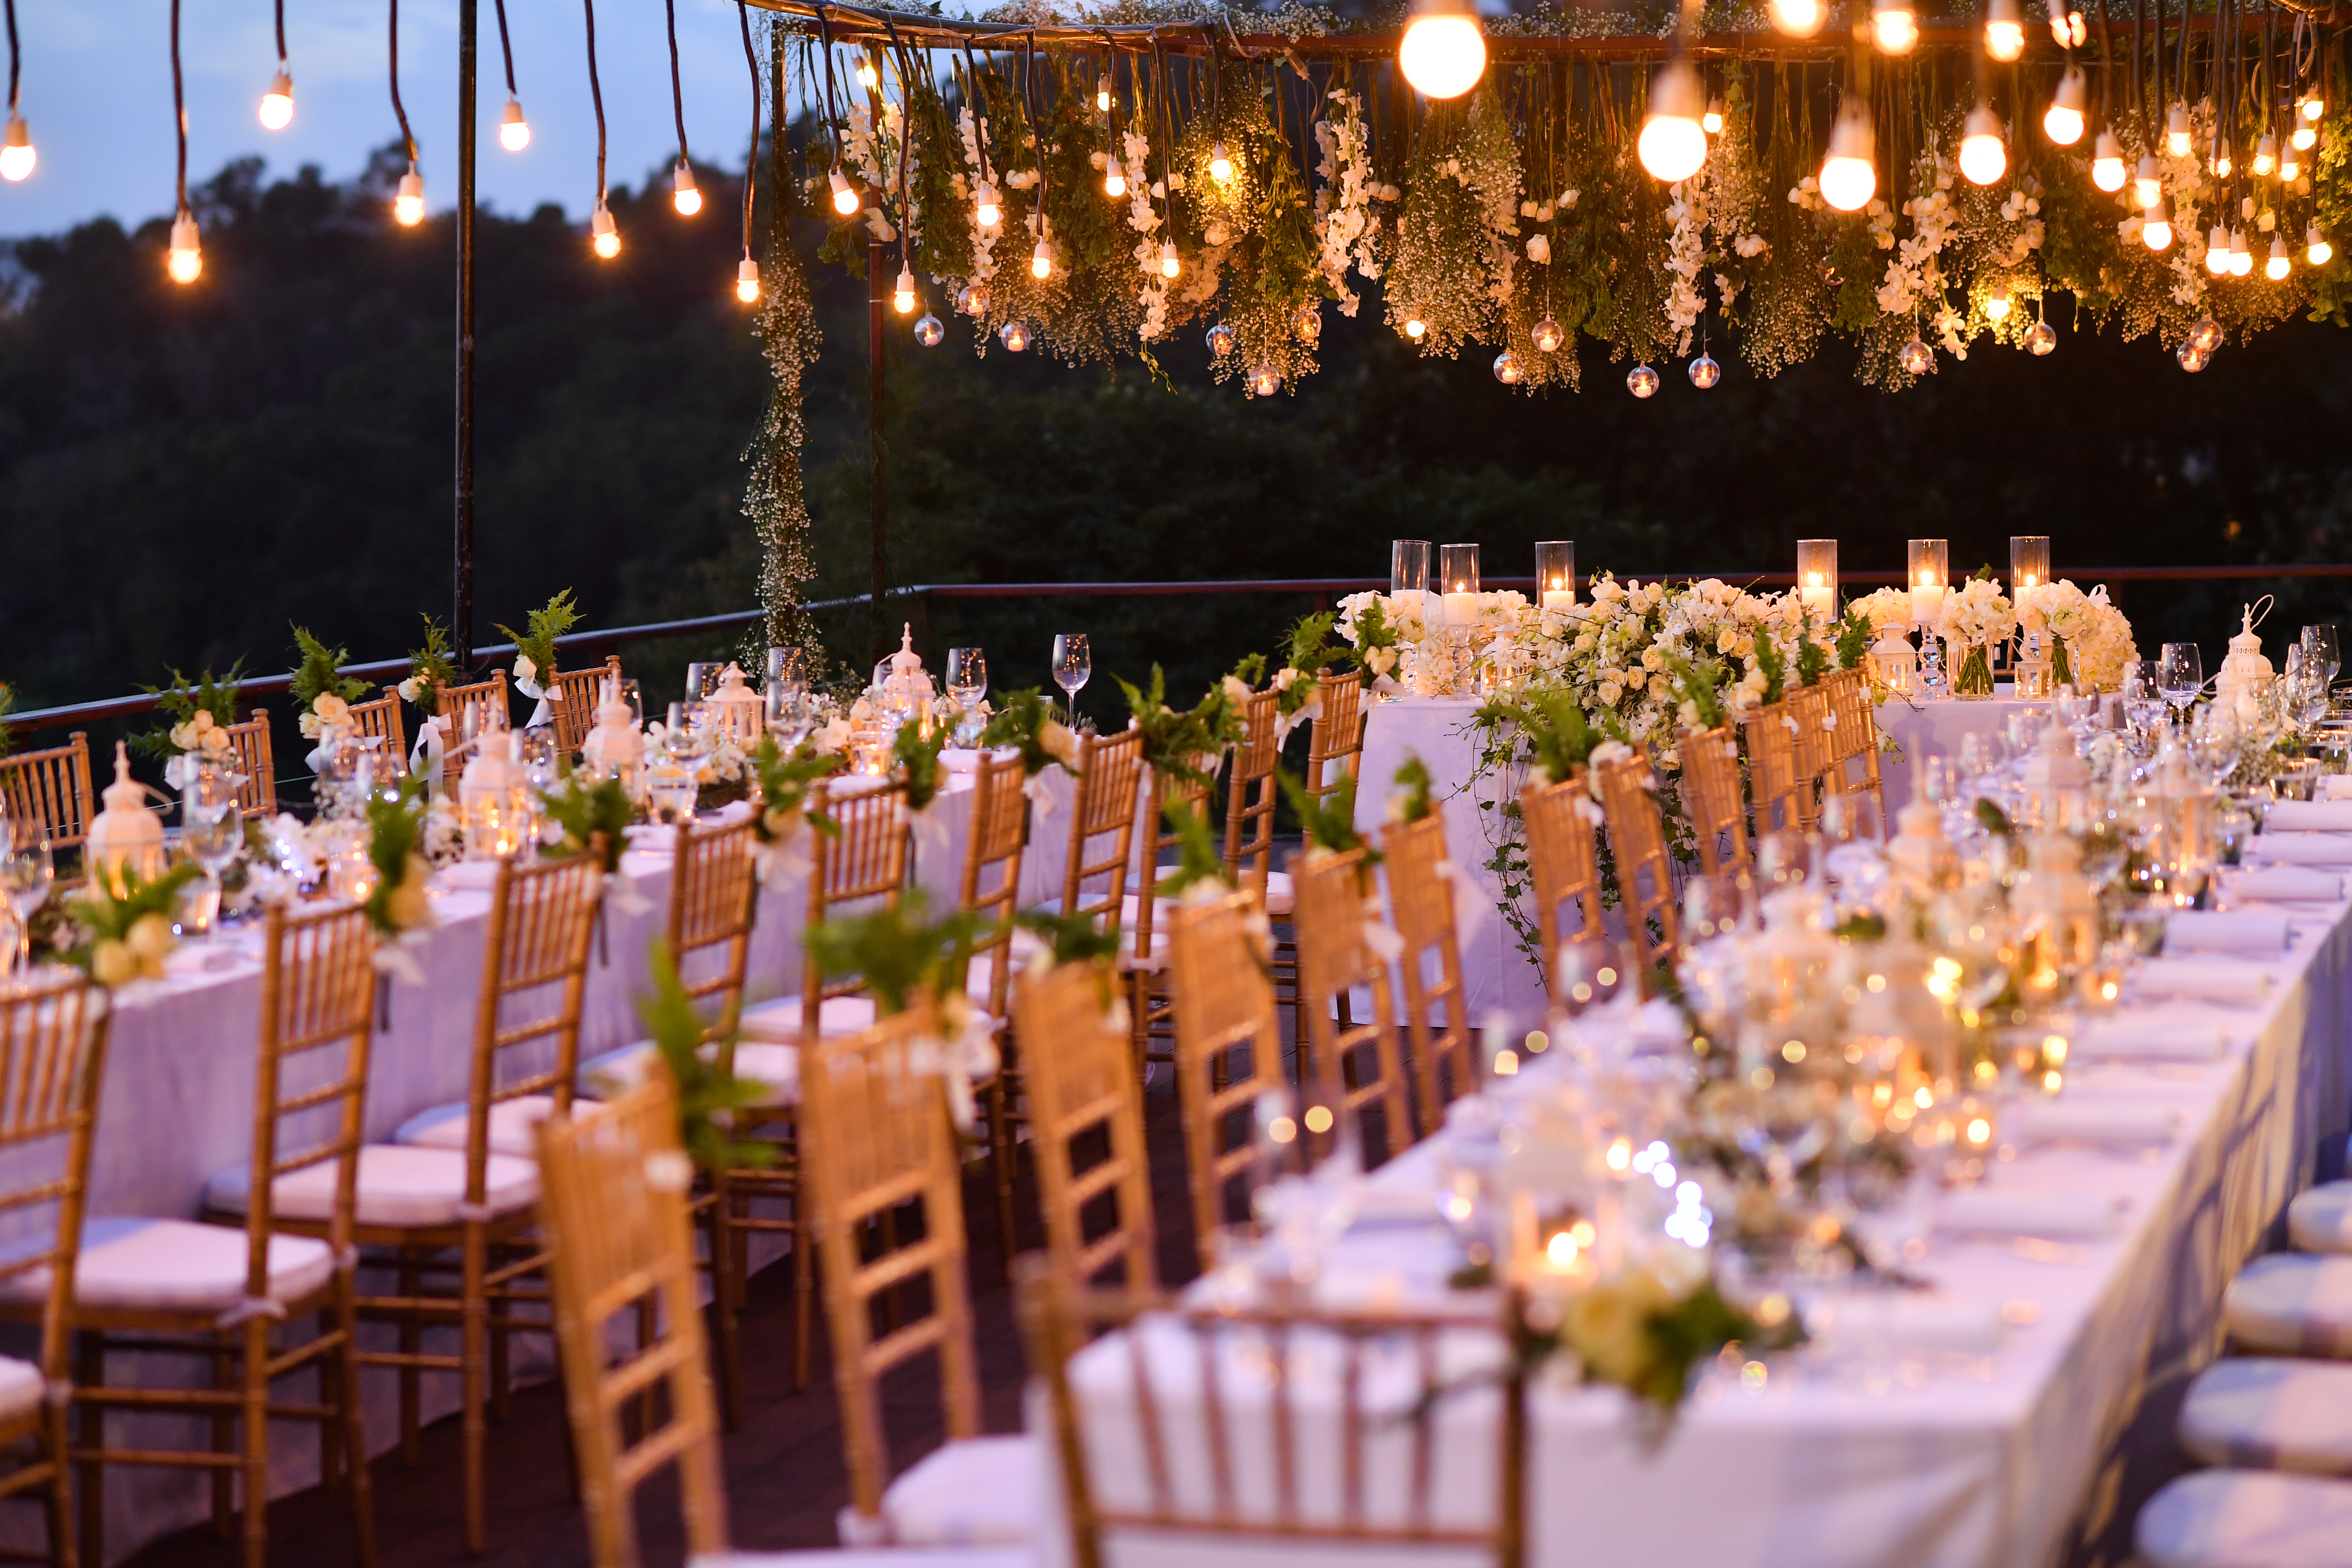 An image of a beautifully decorated wedding reception | Source: Shutterstock